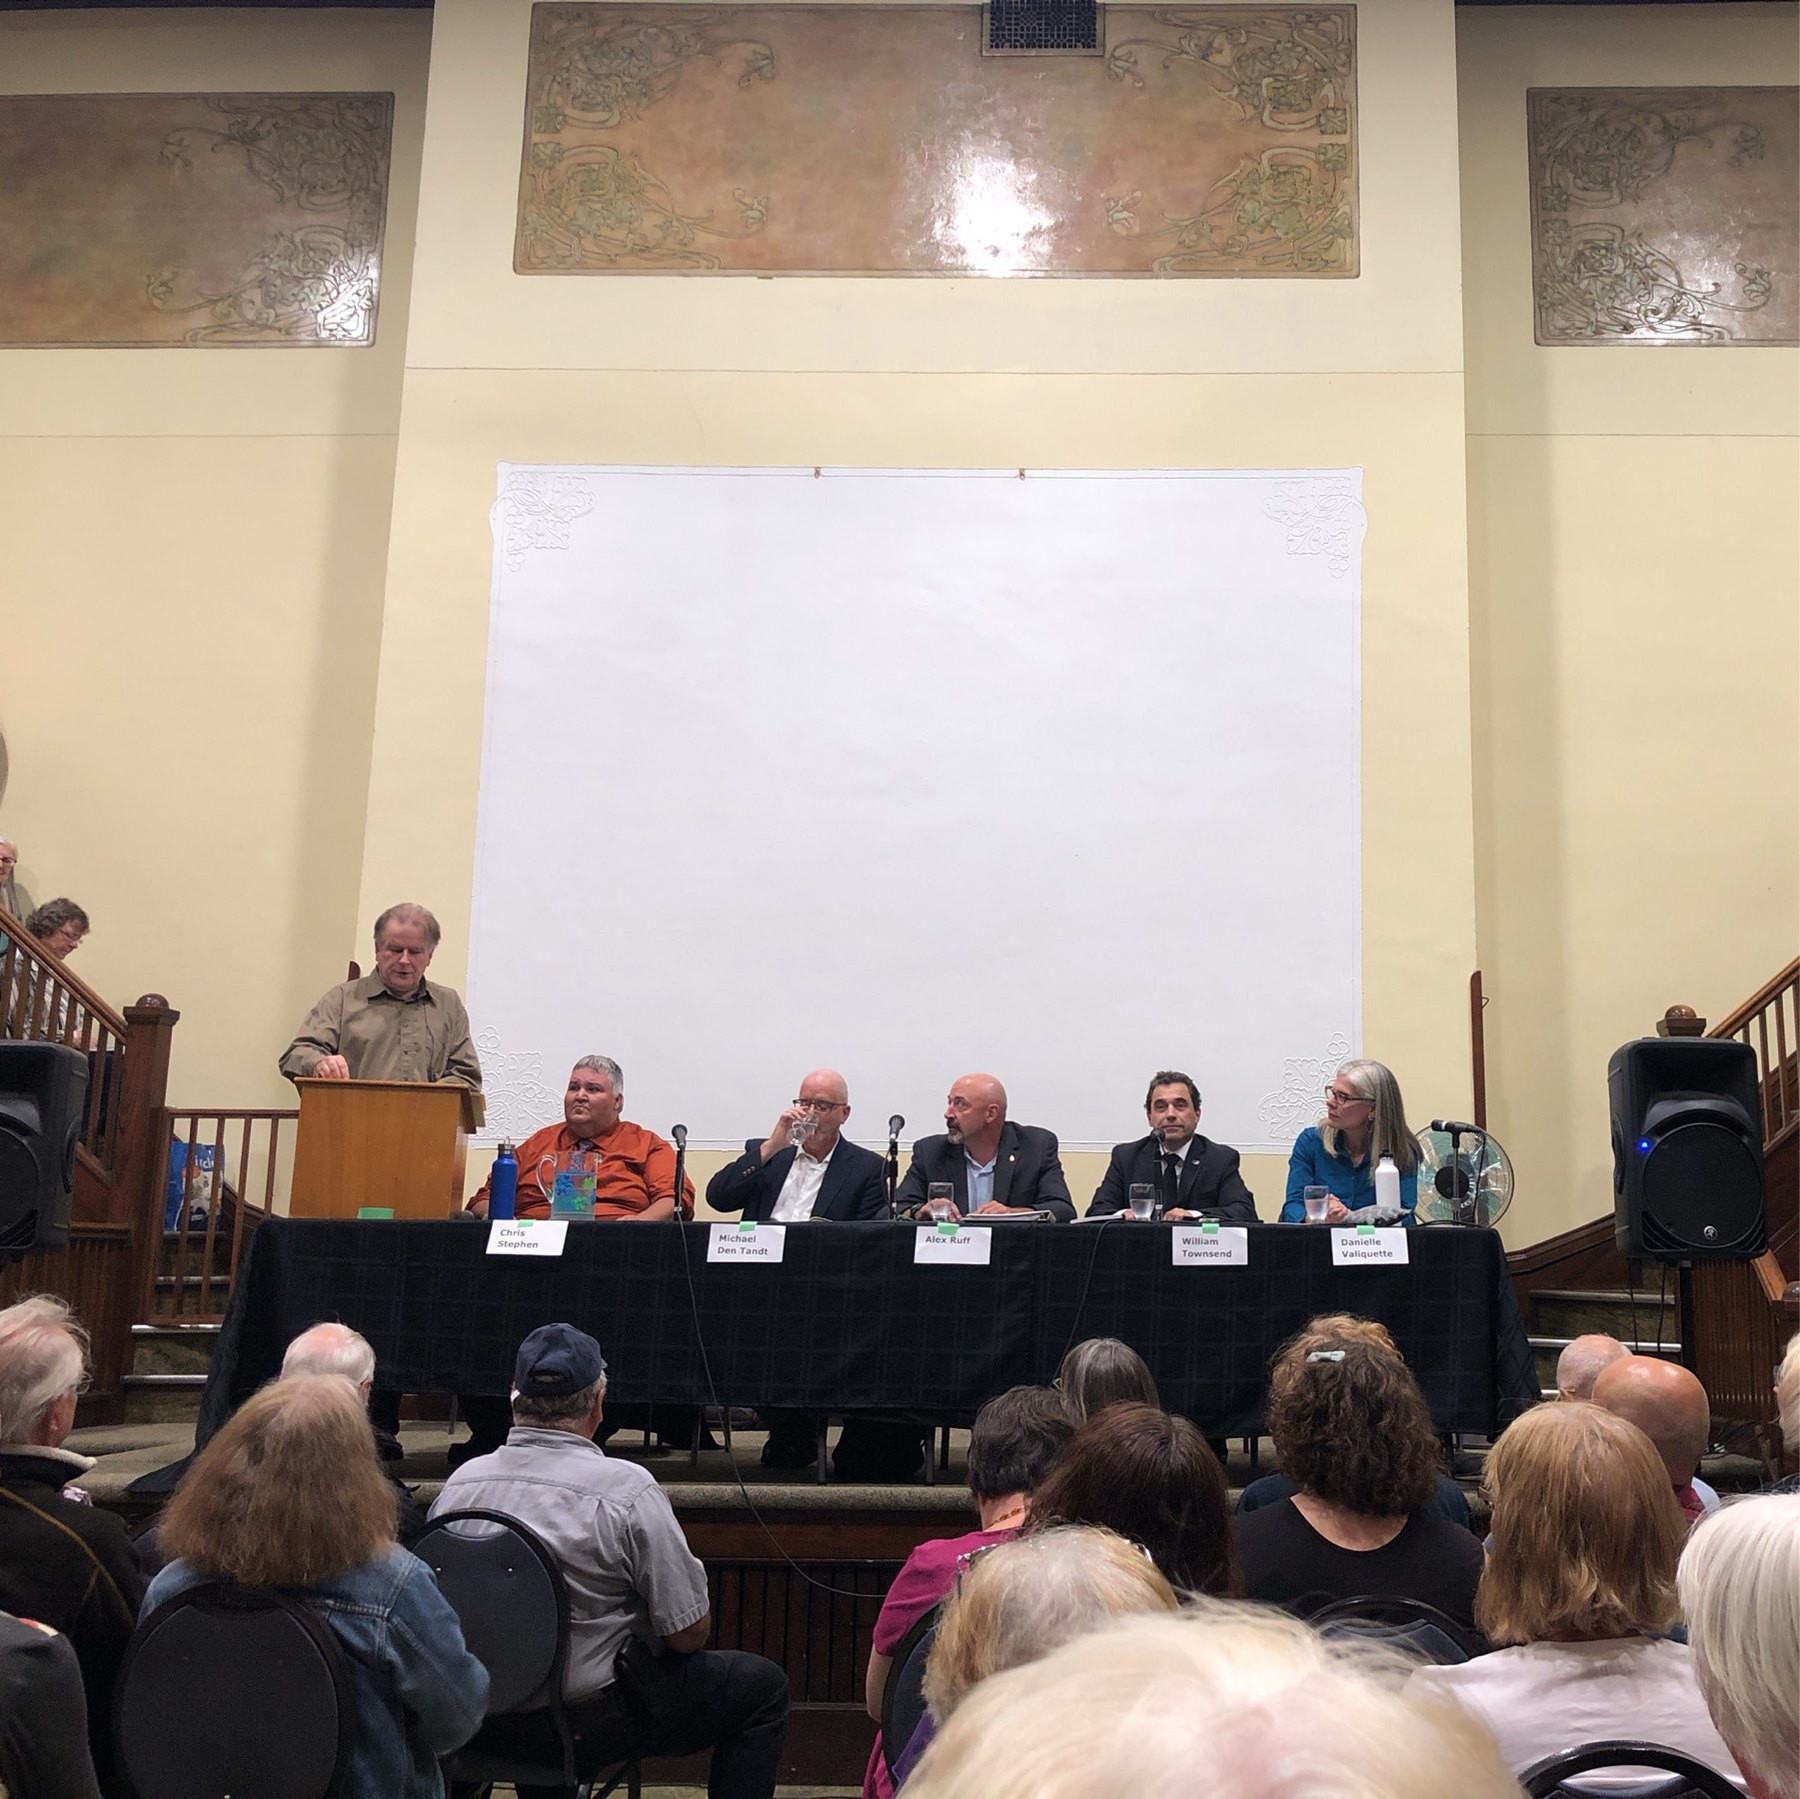 five candidates and a moderator  face the audience 